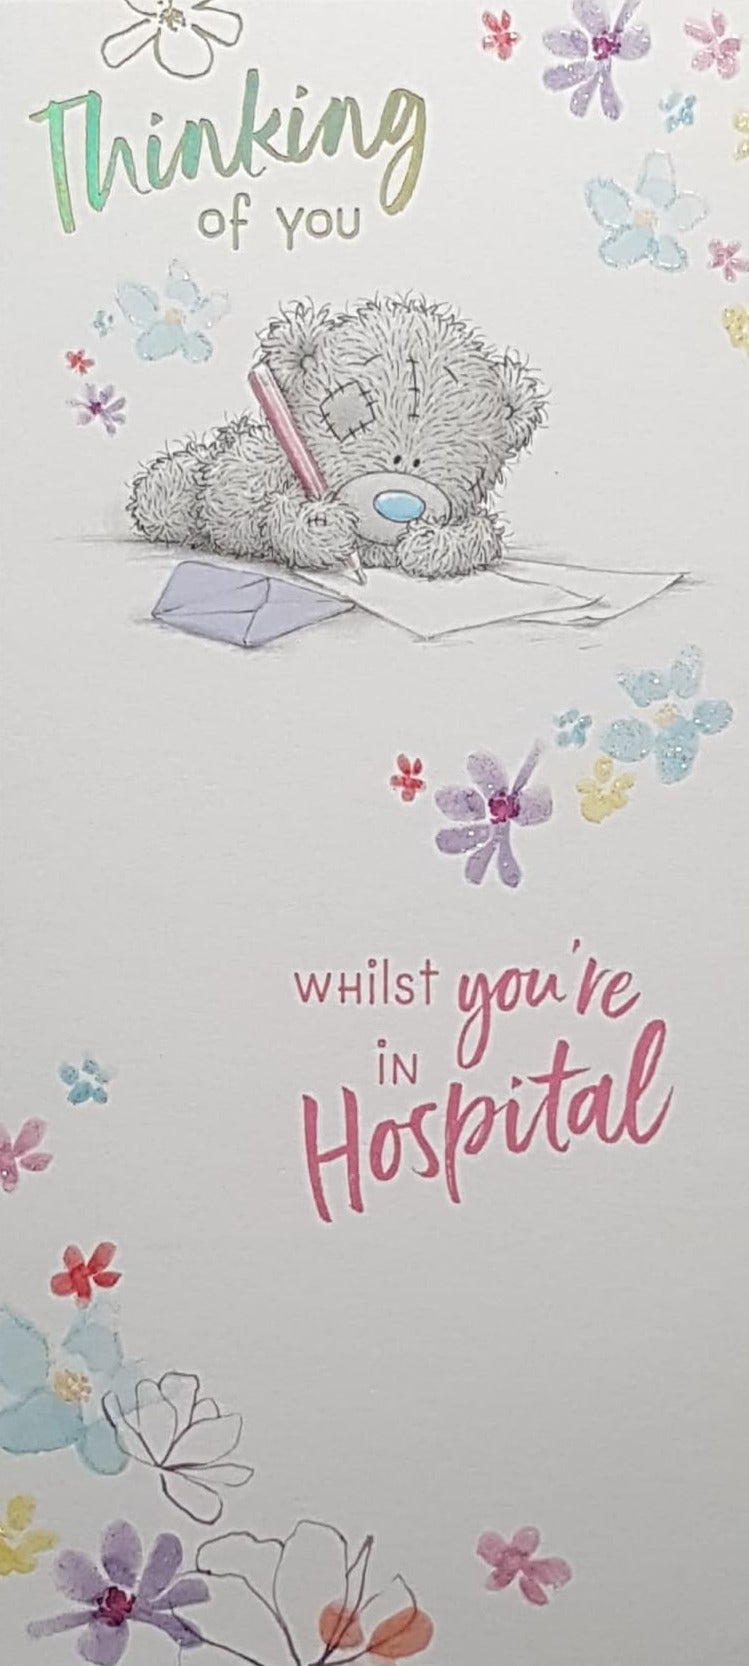 Thinking Of You Card - A Teddy Writing A Letter & ...Whilst You're In Hospital